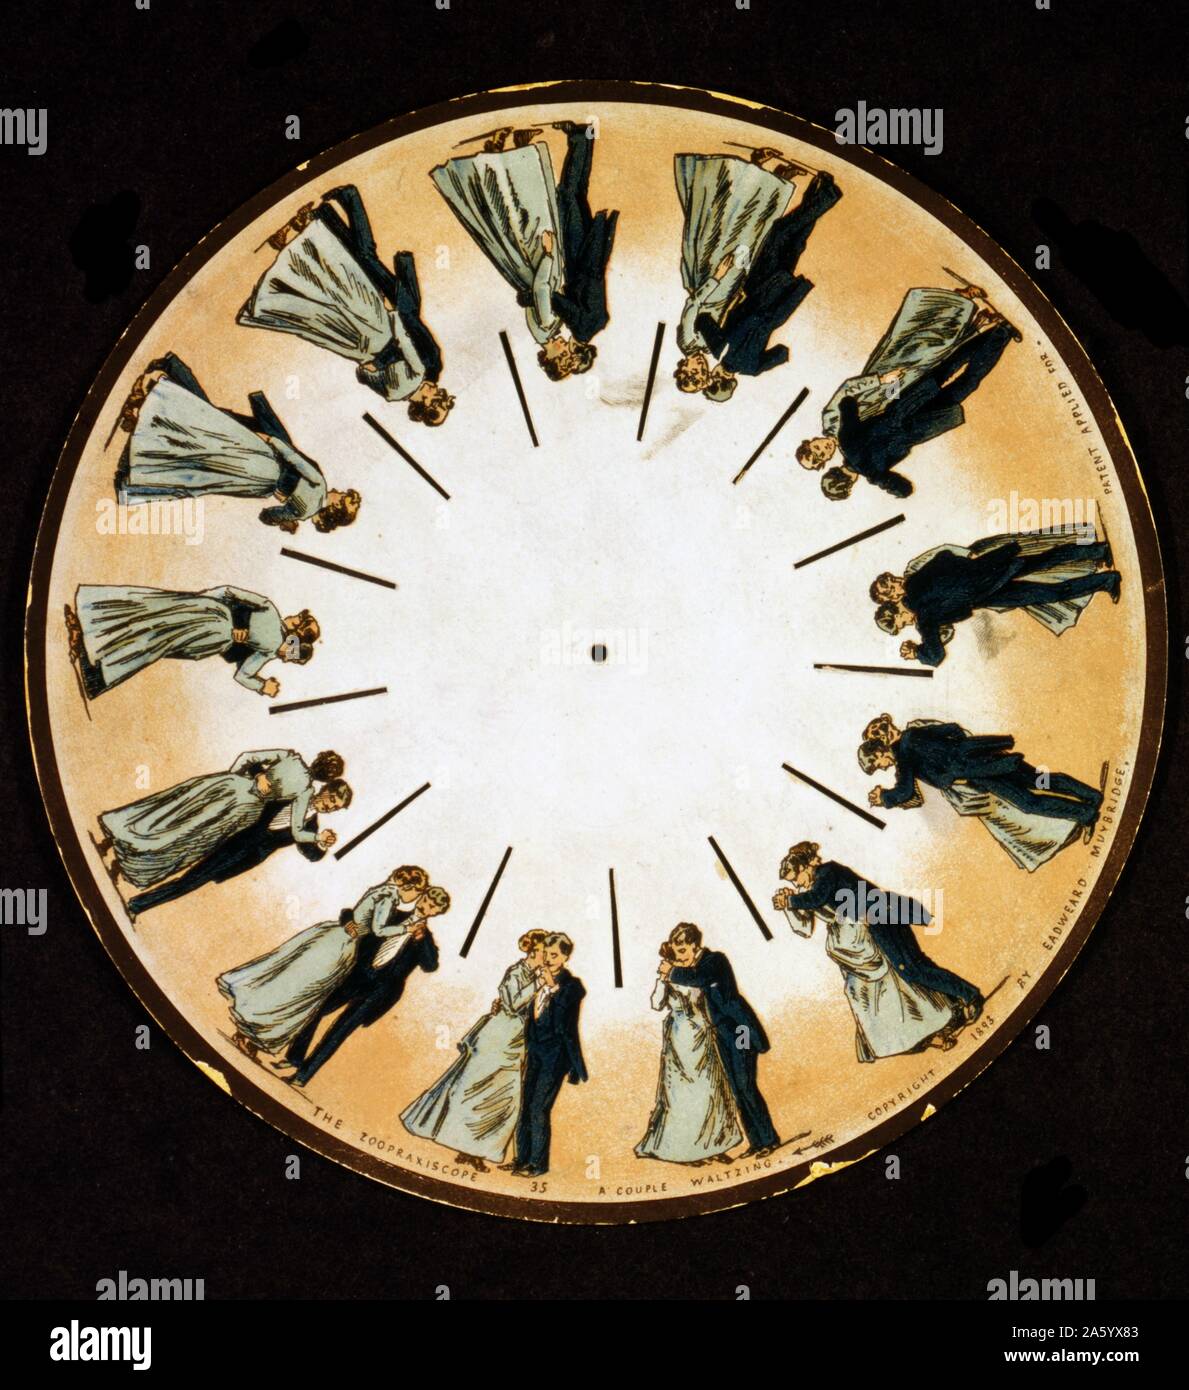 A zoetrope pre-film animation device that produced the illusion of motion by displaying a sequence of drawings or photographs showing progressive phases of that motion 1880 Stock Photo